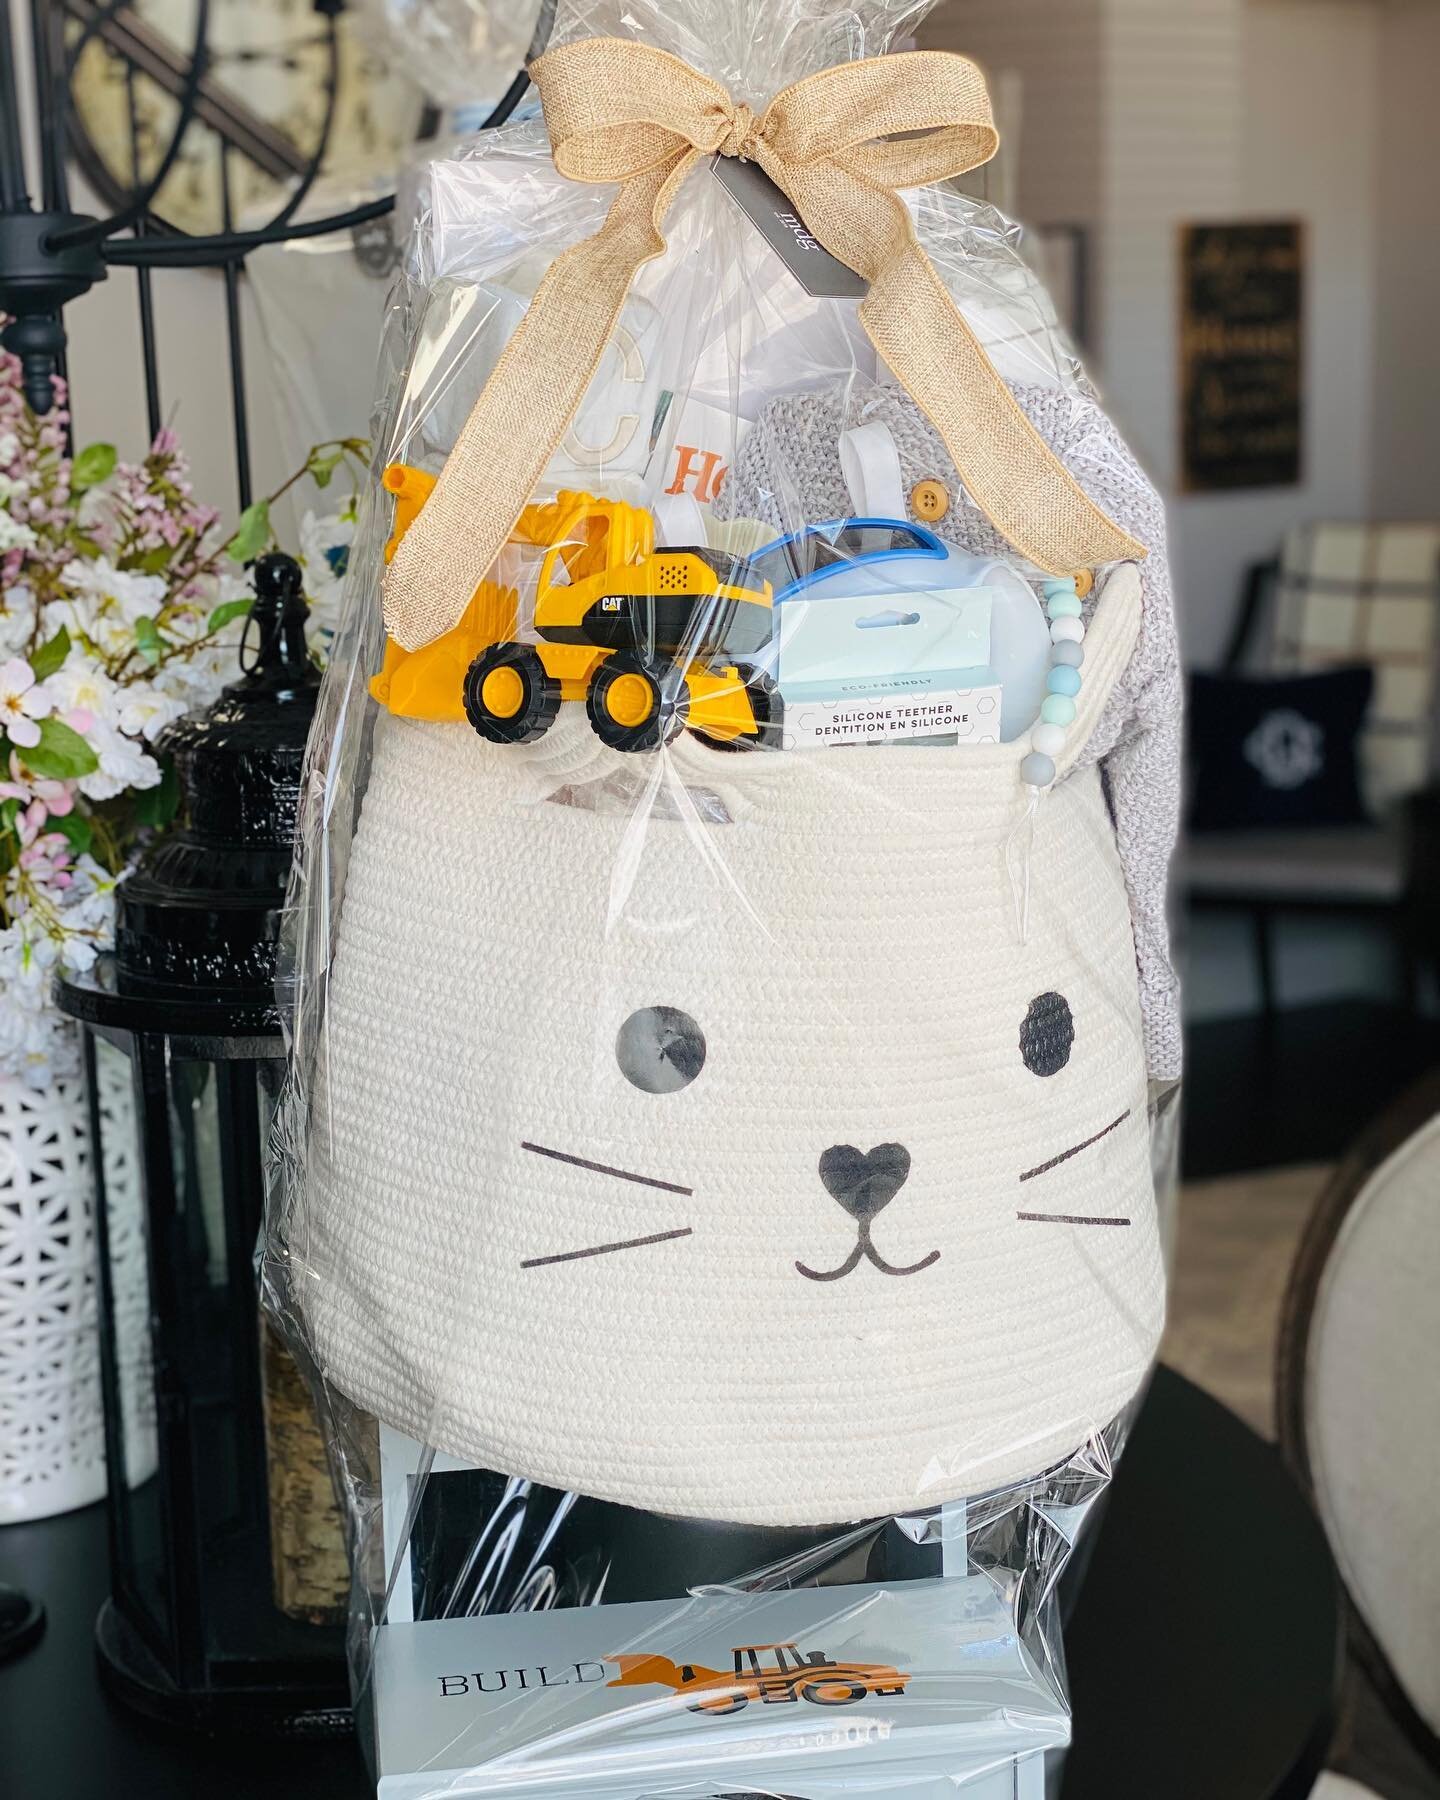 This huge baby basket was one of our favourites to make! 

It has everything from toys to clothes to a cute little tractor step stool! 

.
.
.
.
#giftbasket #giftbaskets #giftideas #gourmetgiftbaskets #giftbasketsforalloccasions #customizedgiftbasket